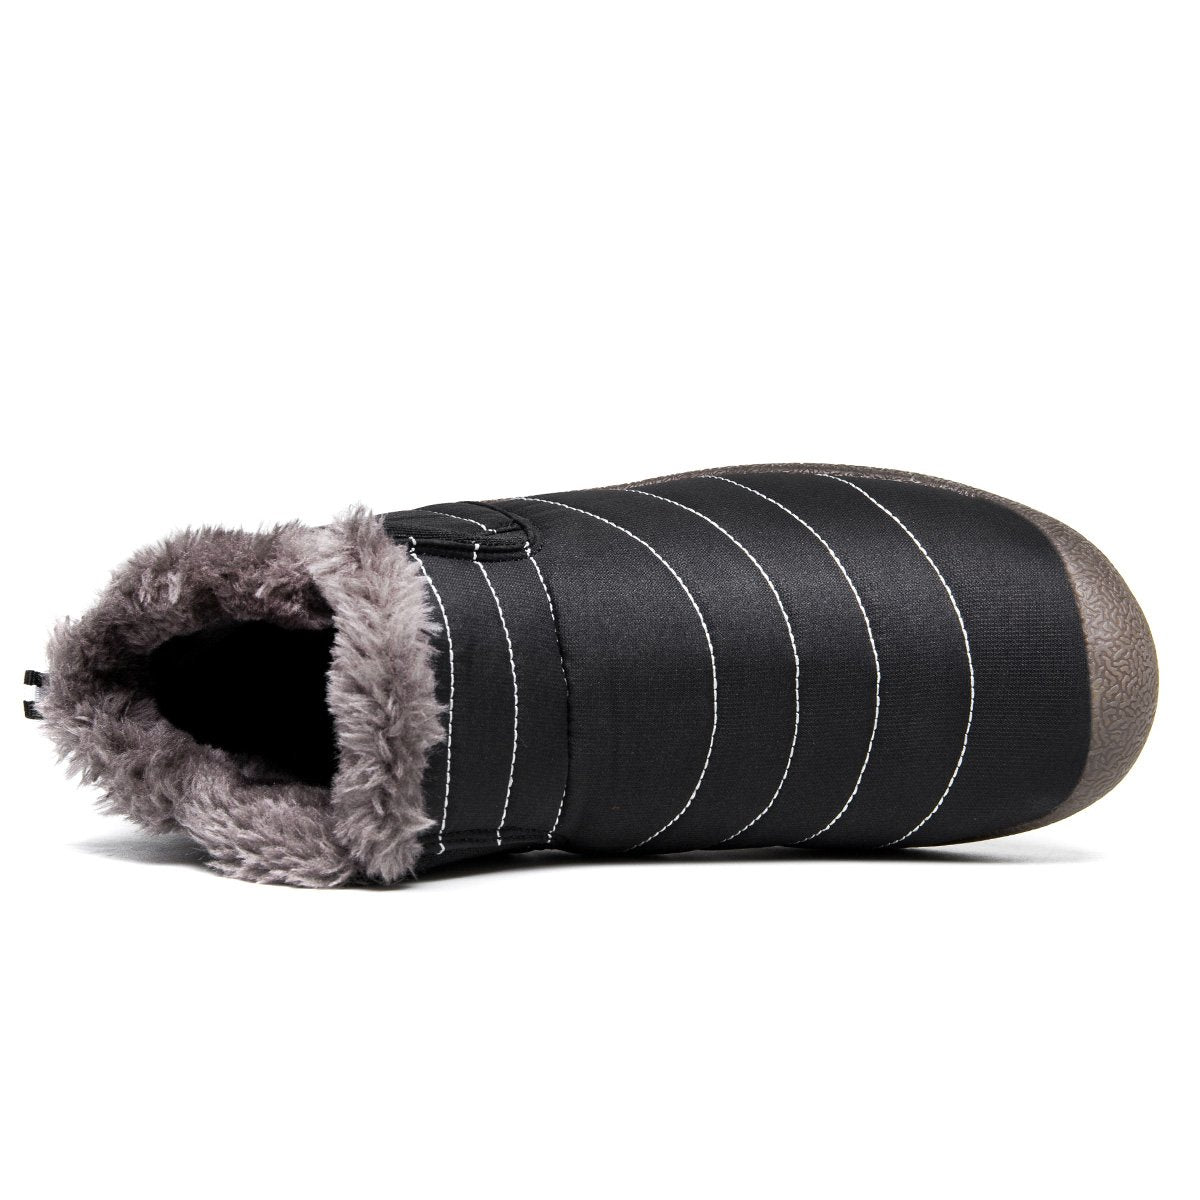 Men's Winter Snow Boots With Plush Lining